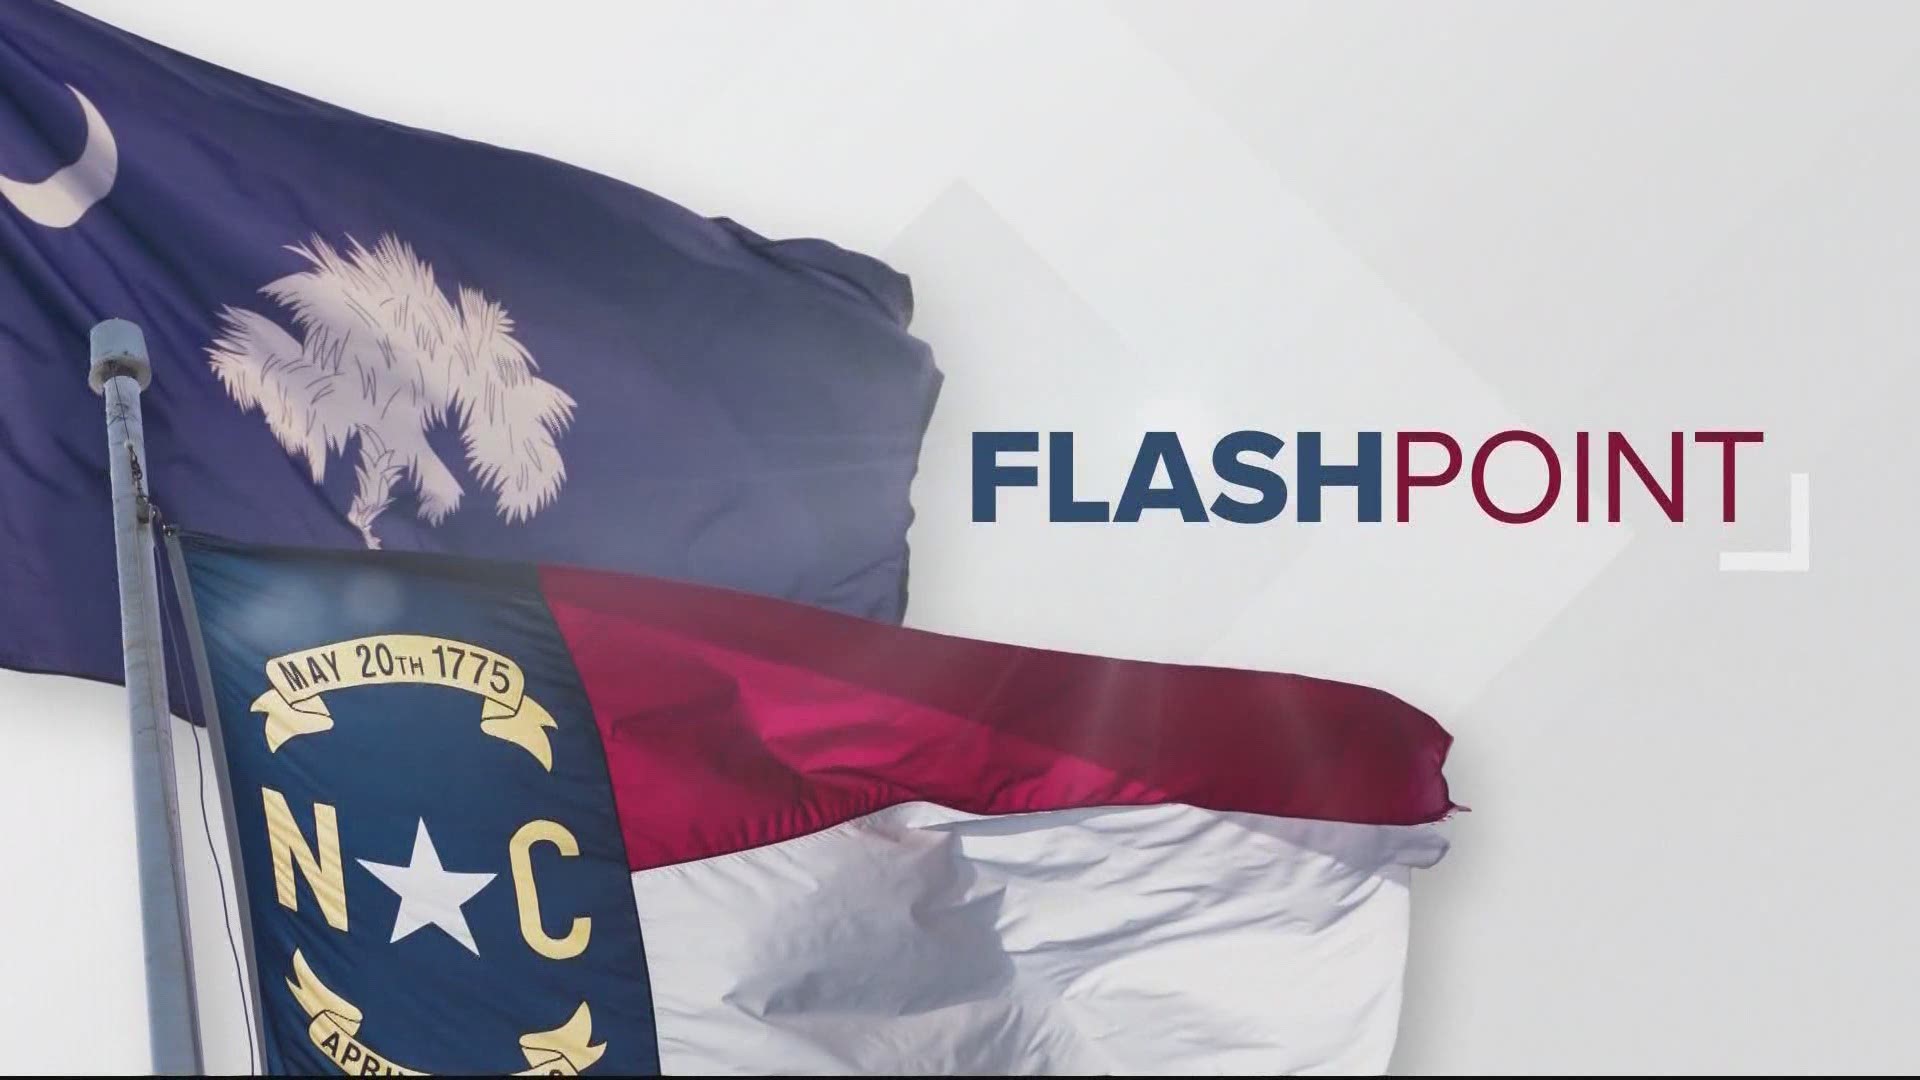 Flashpoint 7/19: Charlotte City Councilman says police are asked to do a lot and other government services should help ensure a safe community.